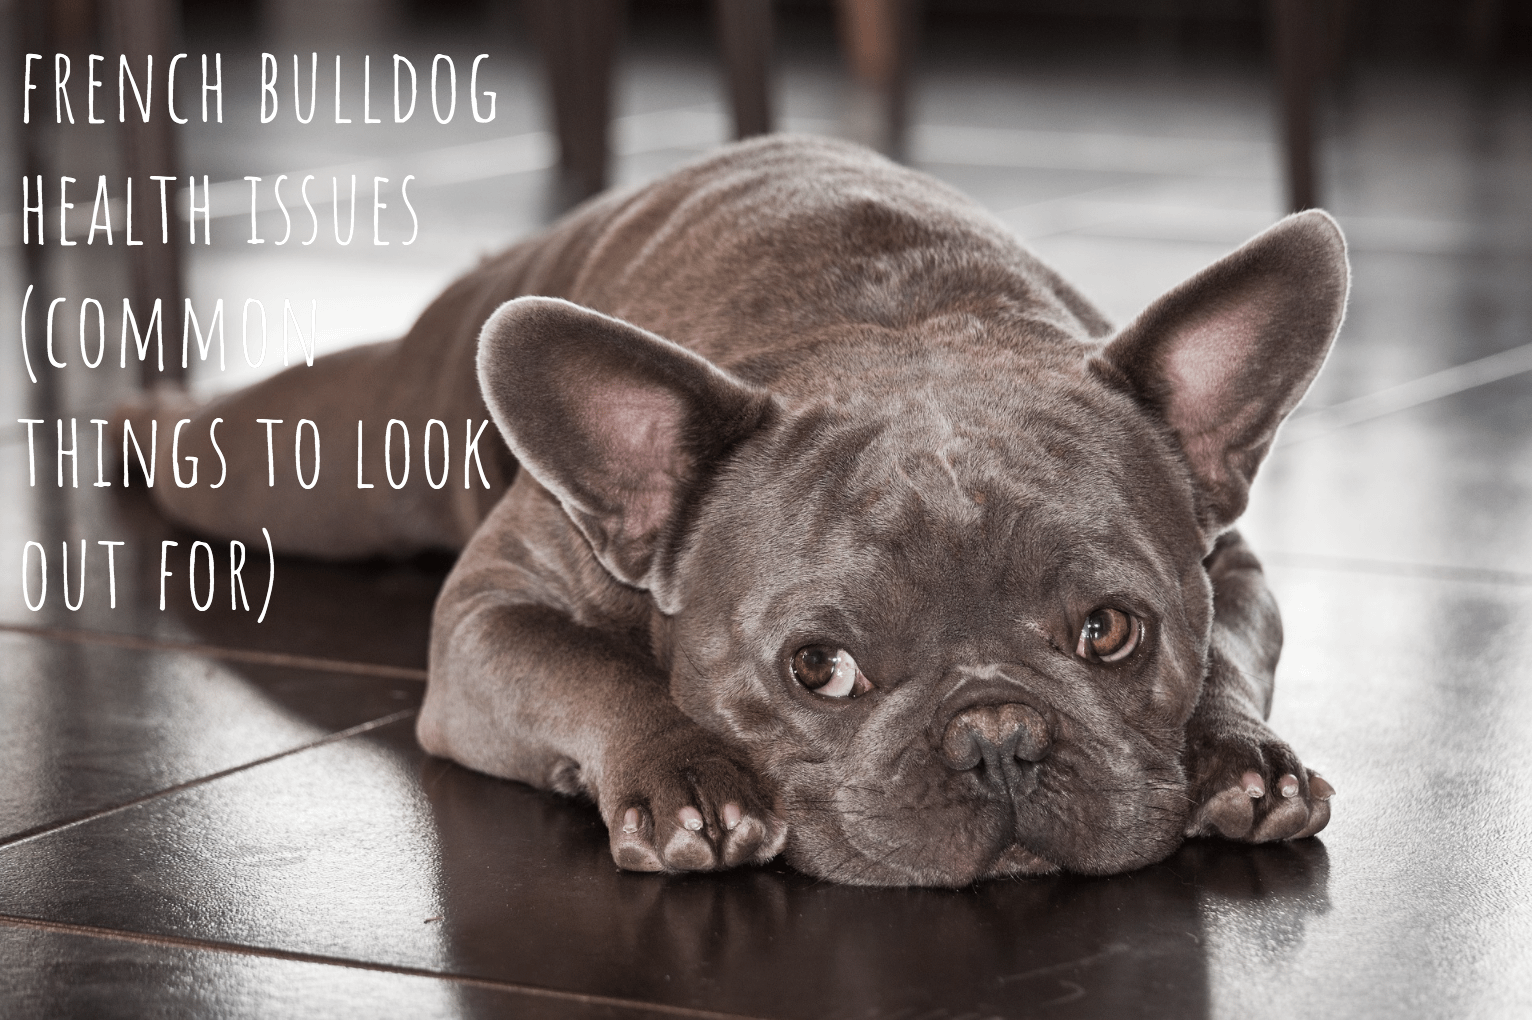 French Bulldog health issues. (Common things to look out for.)